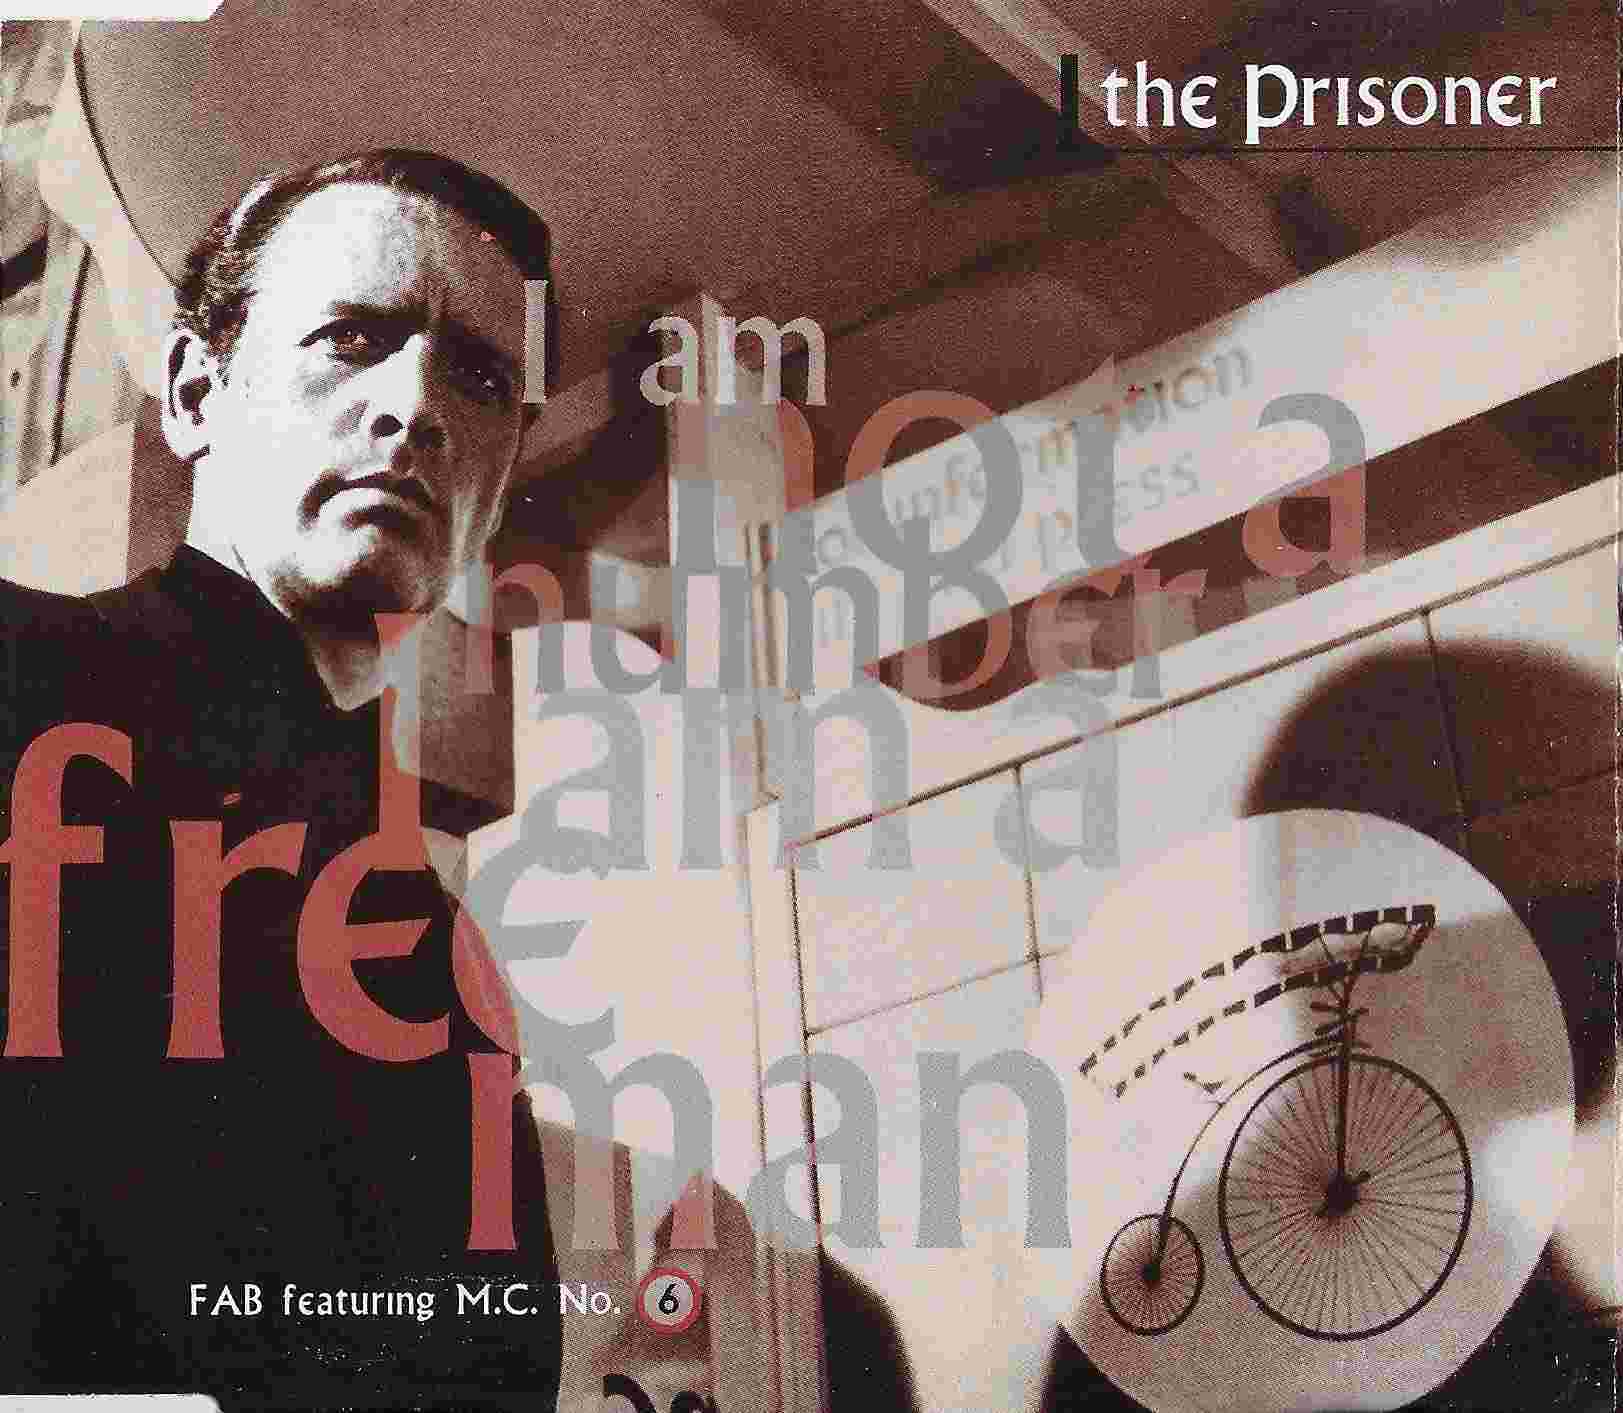 Picture of FAB CD 6 The prisoner (Free man mix) by artist Ron Grainer / F. A. B. from ITV, Channel 4 and Channel 5 cdsingles library